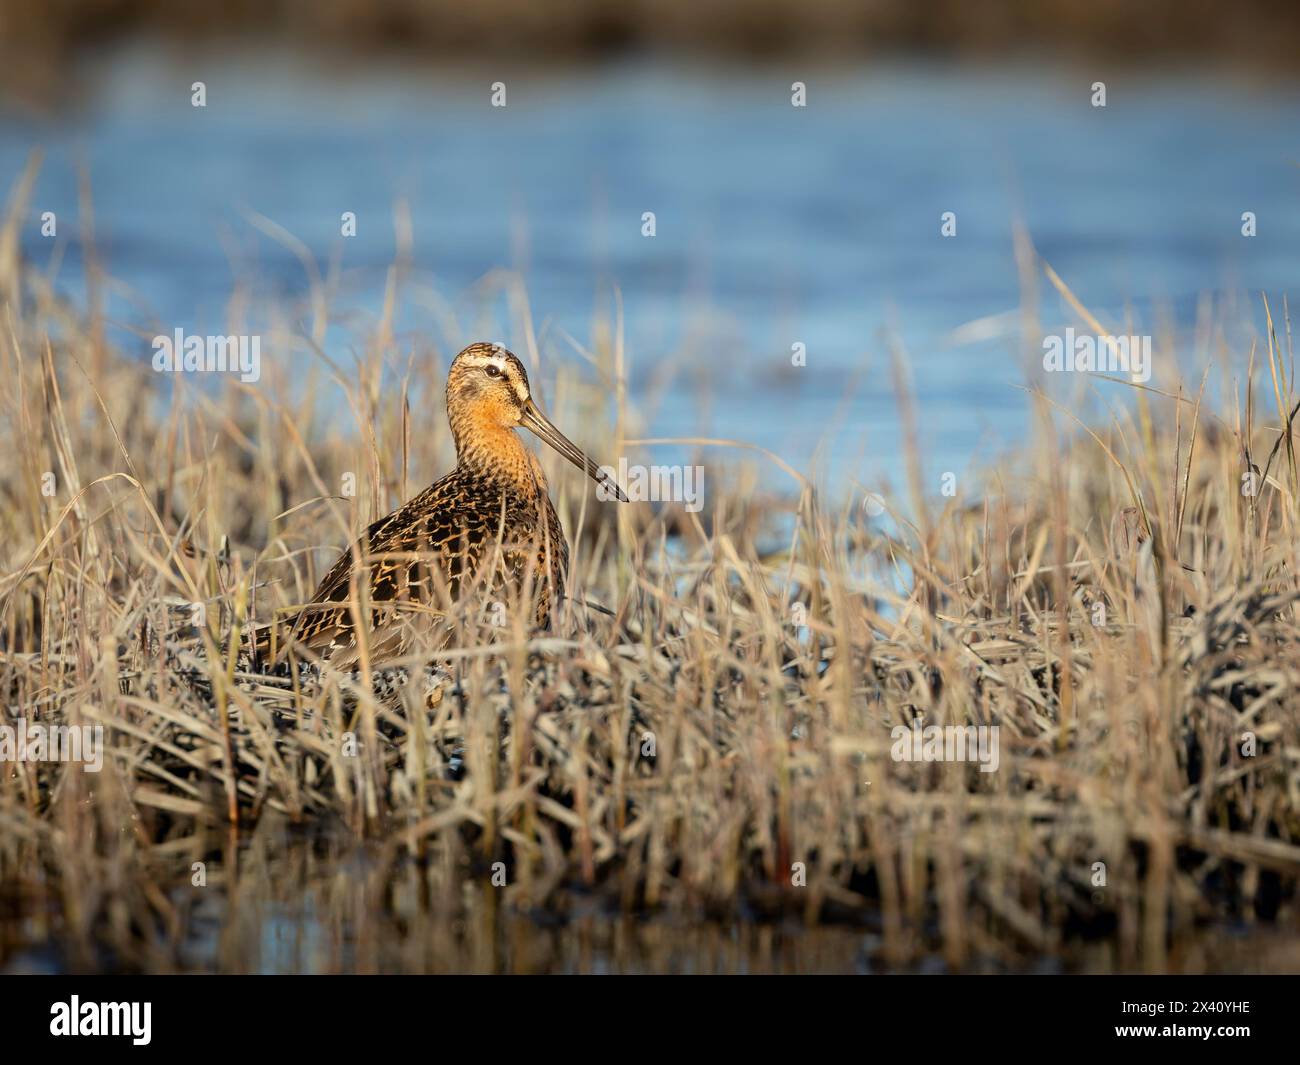 A short-billed dowitcher pauses in an estuary in Southcentral Alaska's Susitna Flats in May. Dowitchers and many other shorebird species use the flats Stock Photo